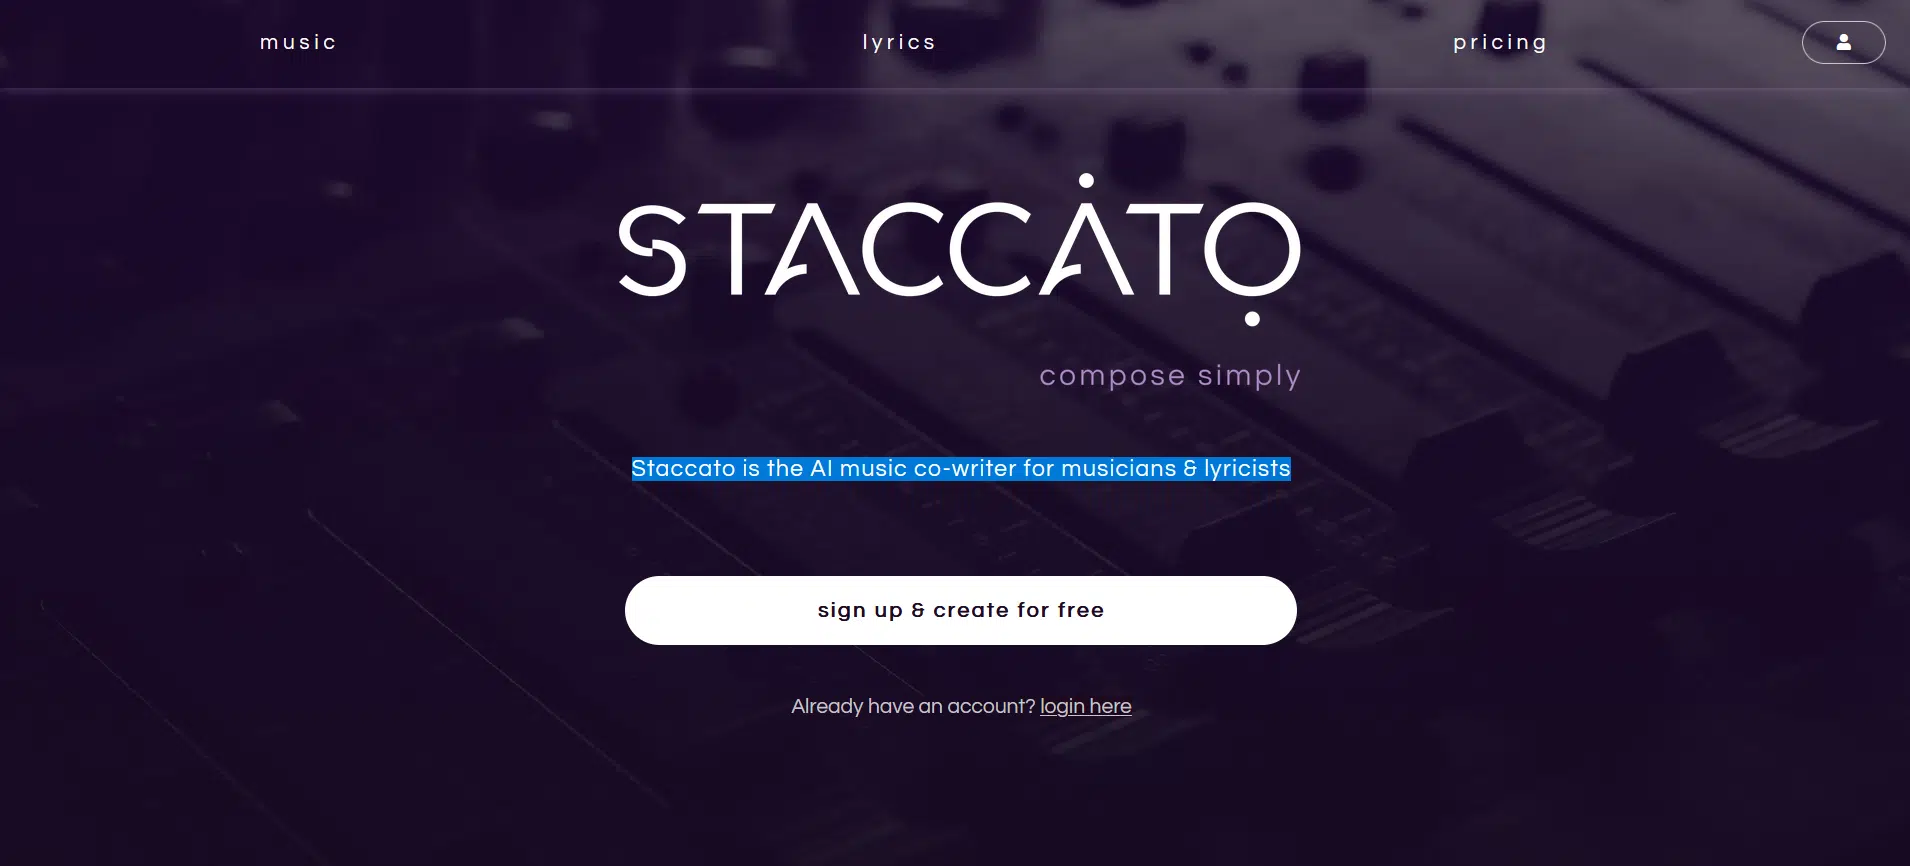 Staccatowebsite picture